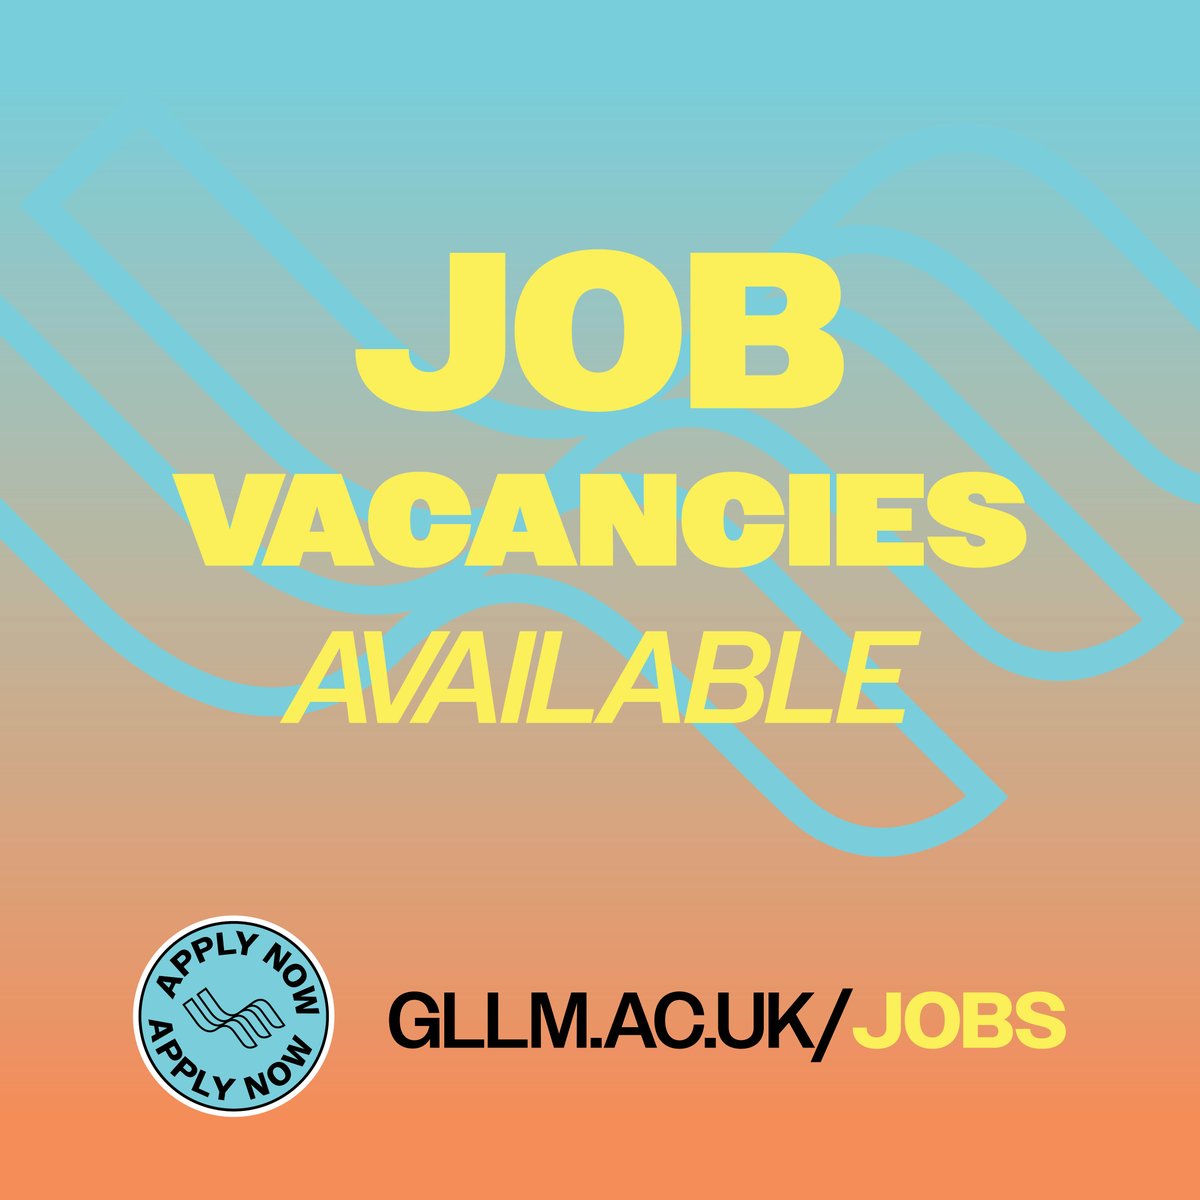 We have a number of exciting job vacancies available at the moment, including 👇 • Chief Executive Officer • Lecturer in Numeracy • Business Development Advisor Visit our website to find out more ➡️ gllm.ac.uk/jobs